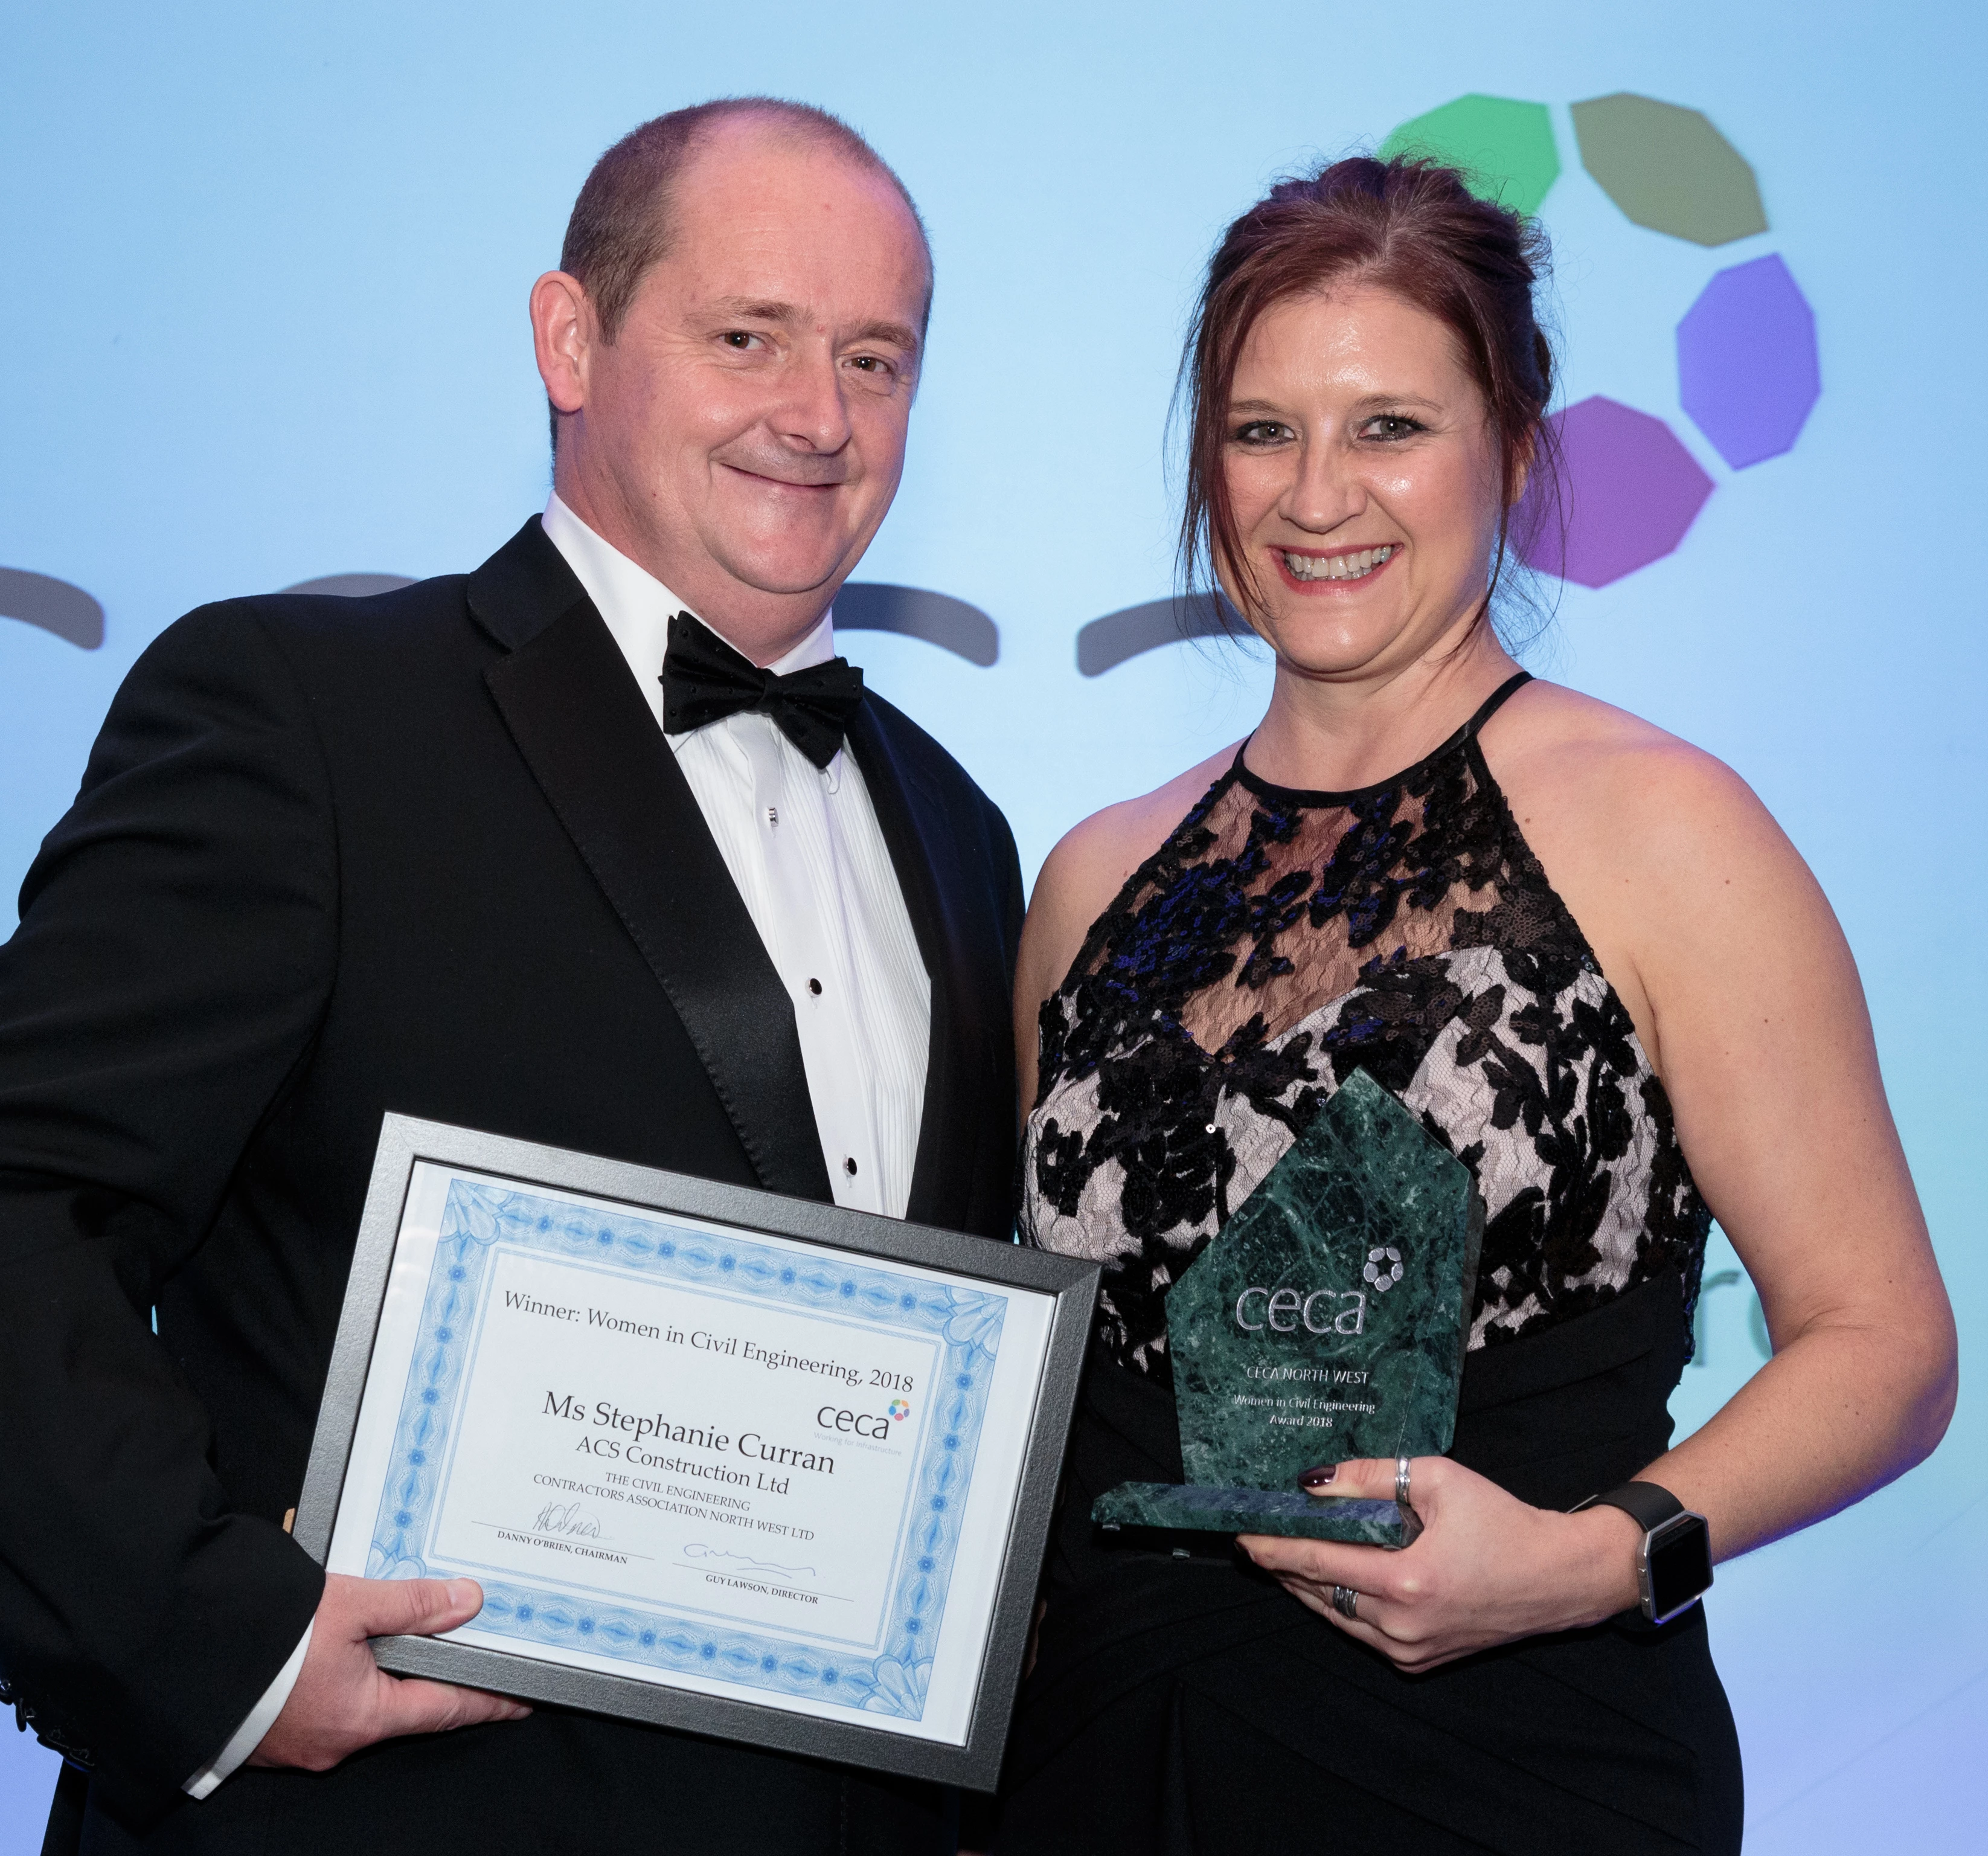 Stephanie Curran receiving her award at the CECA North West ceremony